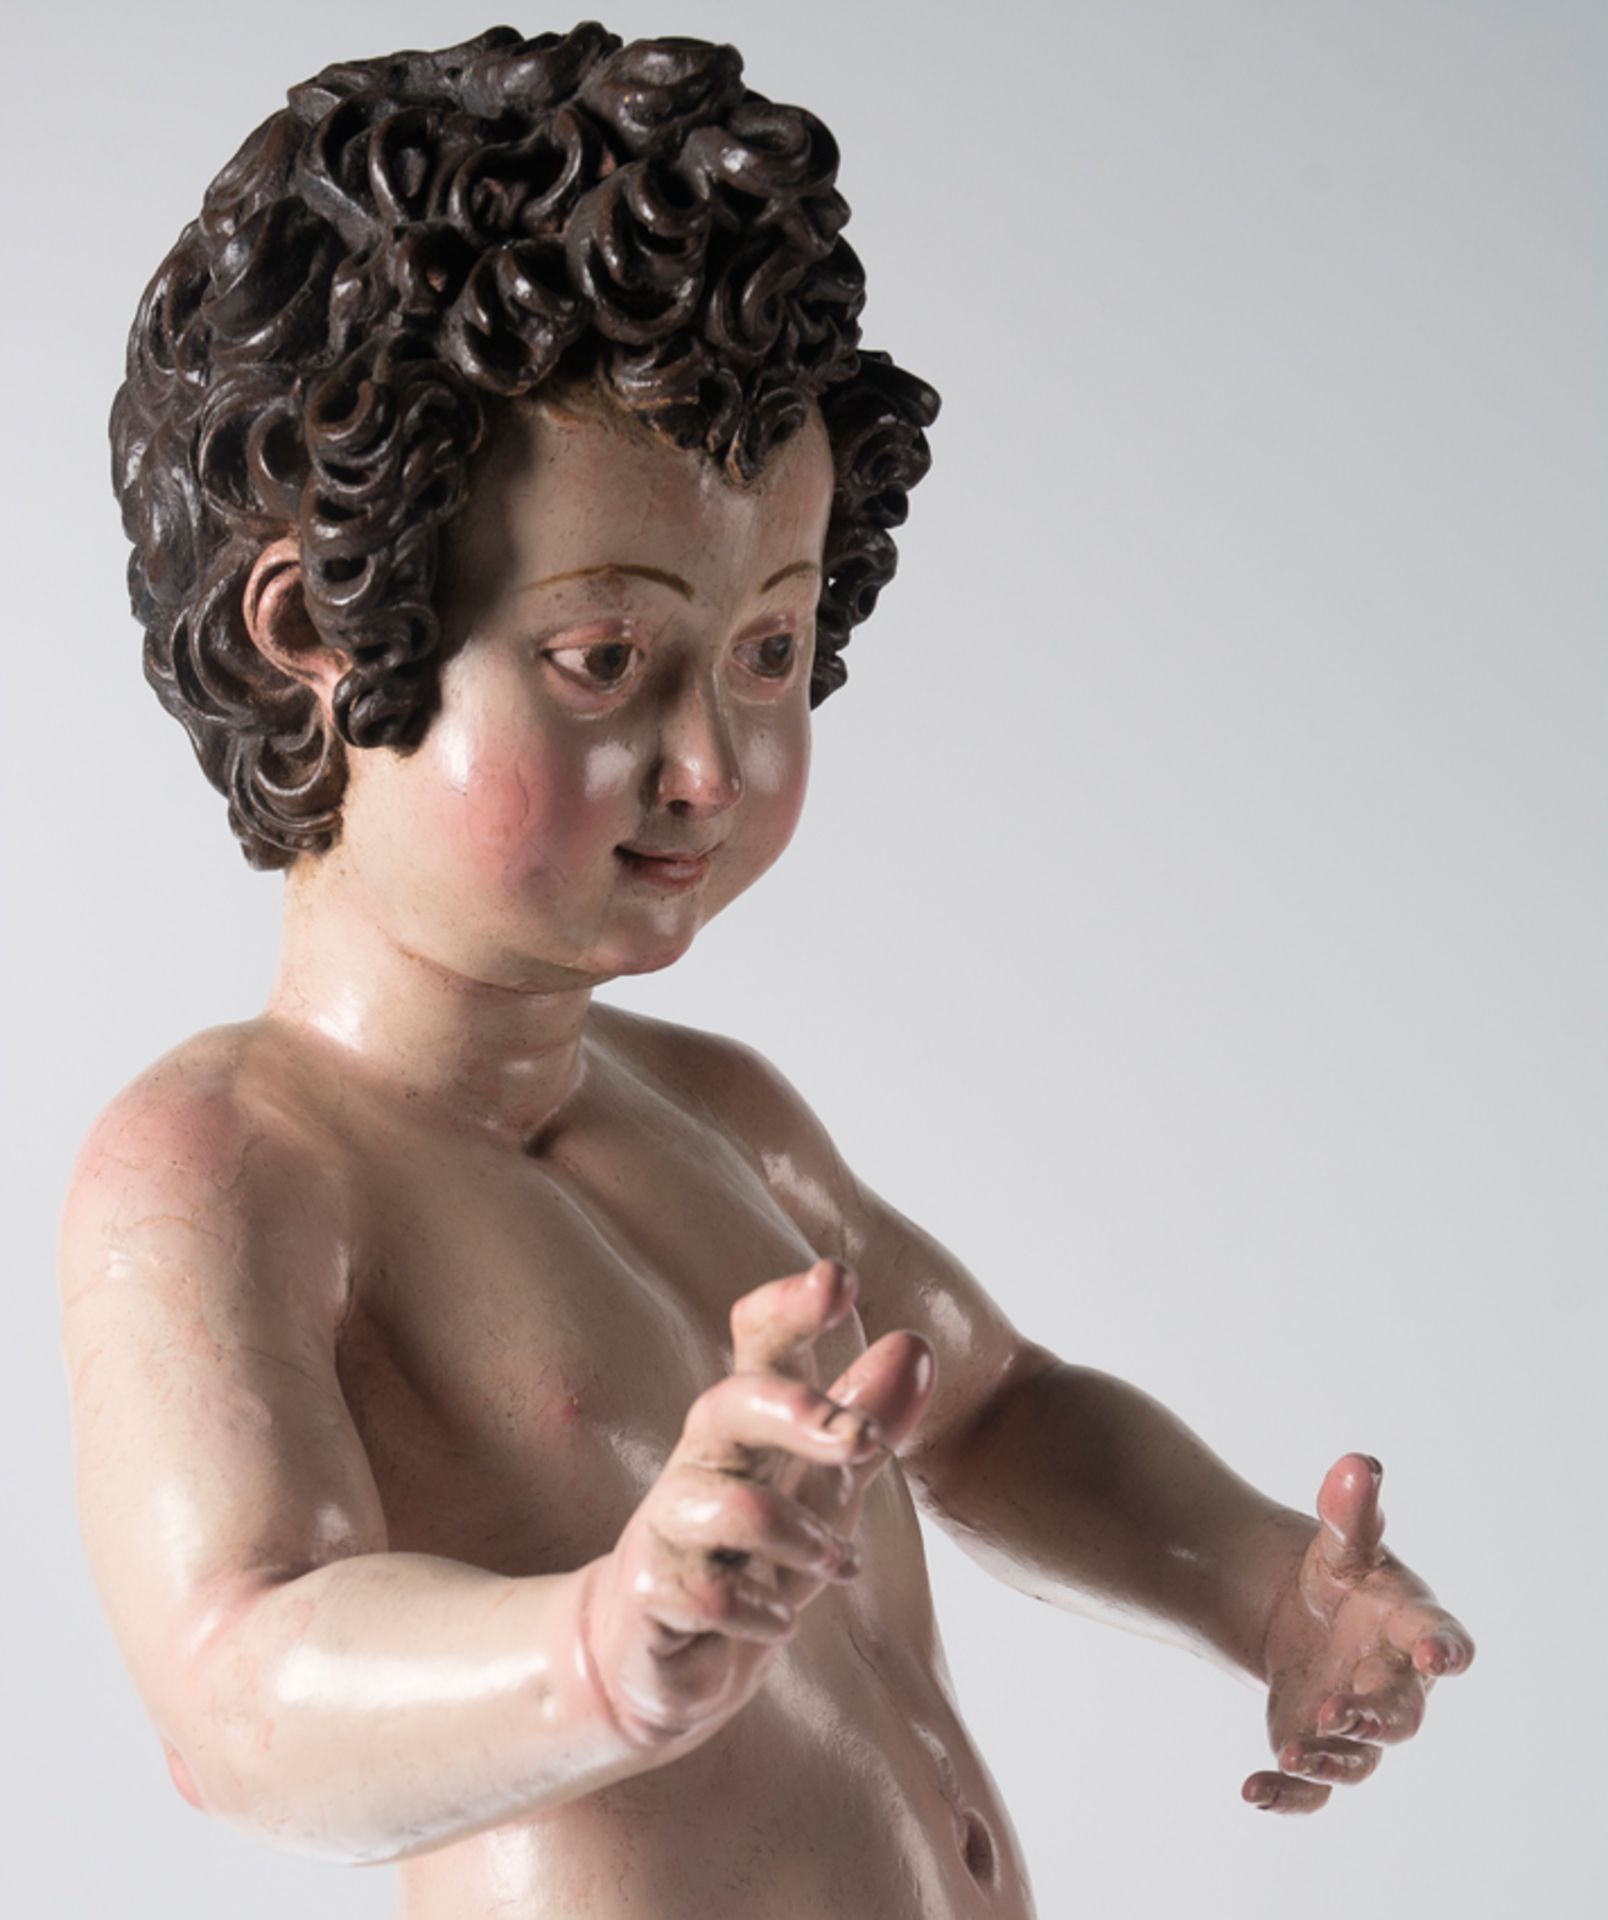 "Christ Child". Carved and polychromed wooden sculpture. Sevillian School. First third of the 17th c - Image 7 of 11